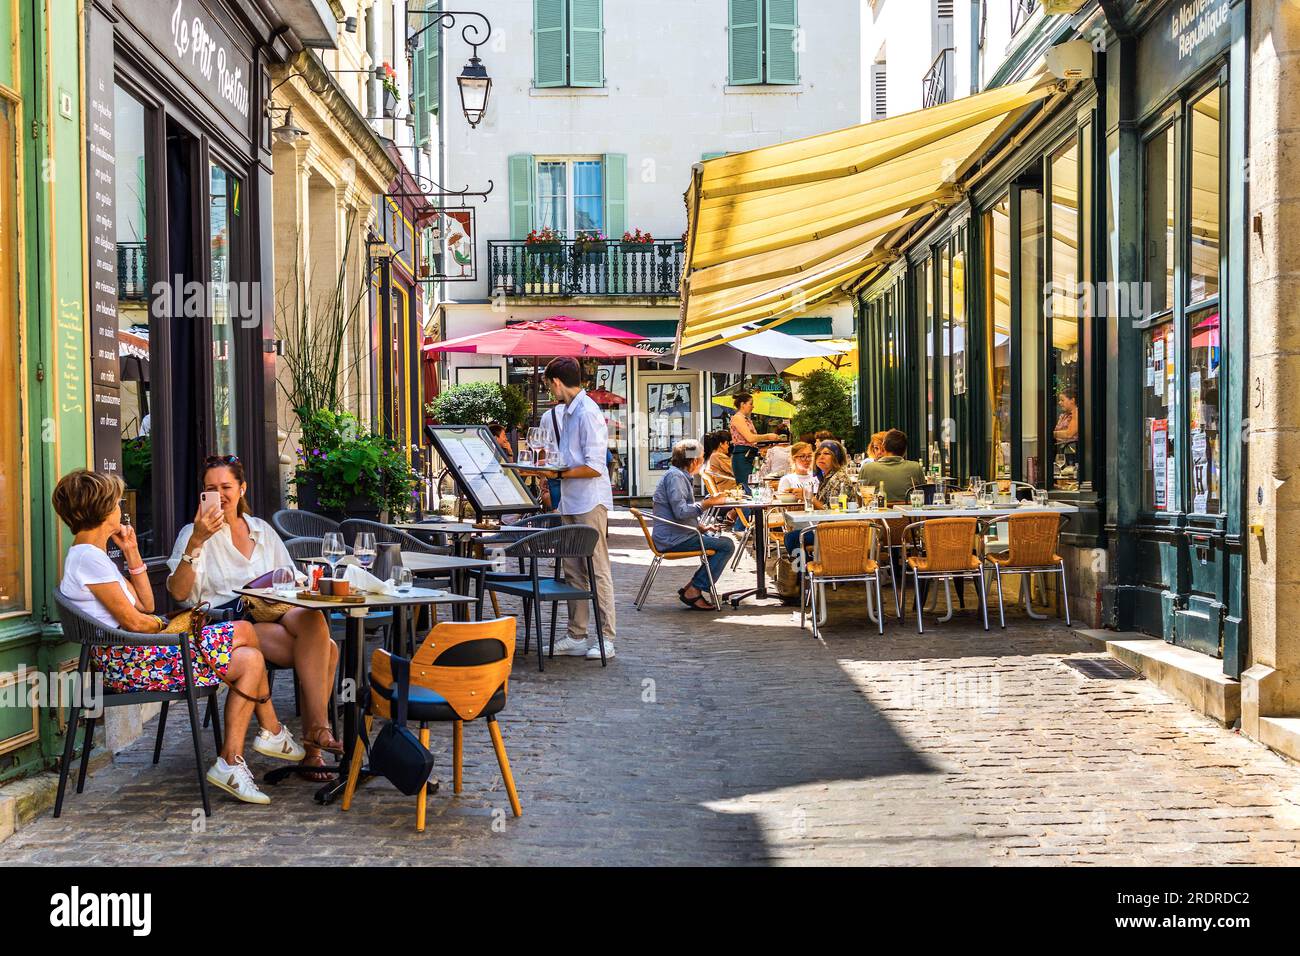 Narrow city center cobbled street with terrace cafes and restaurants - Loches, Indre-et-Loire (37), France. Stock Photo